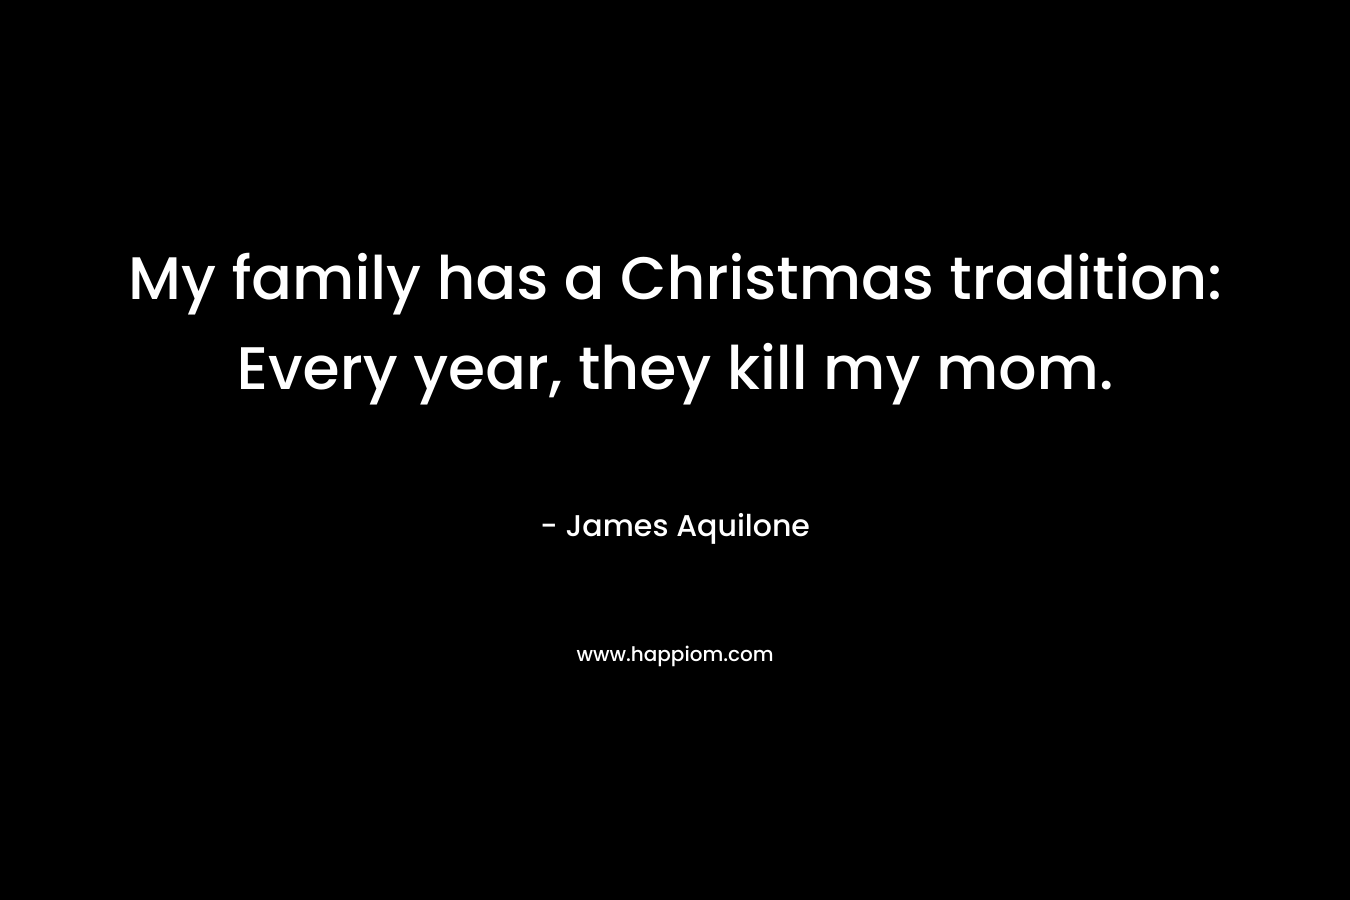 My family has a Christmas tradition: Every year, they kill my mom. – James Aquilone